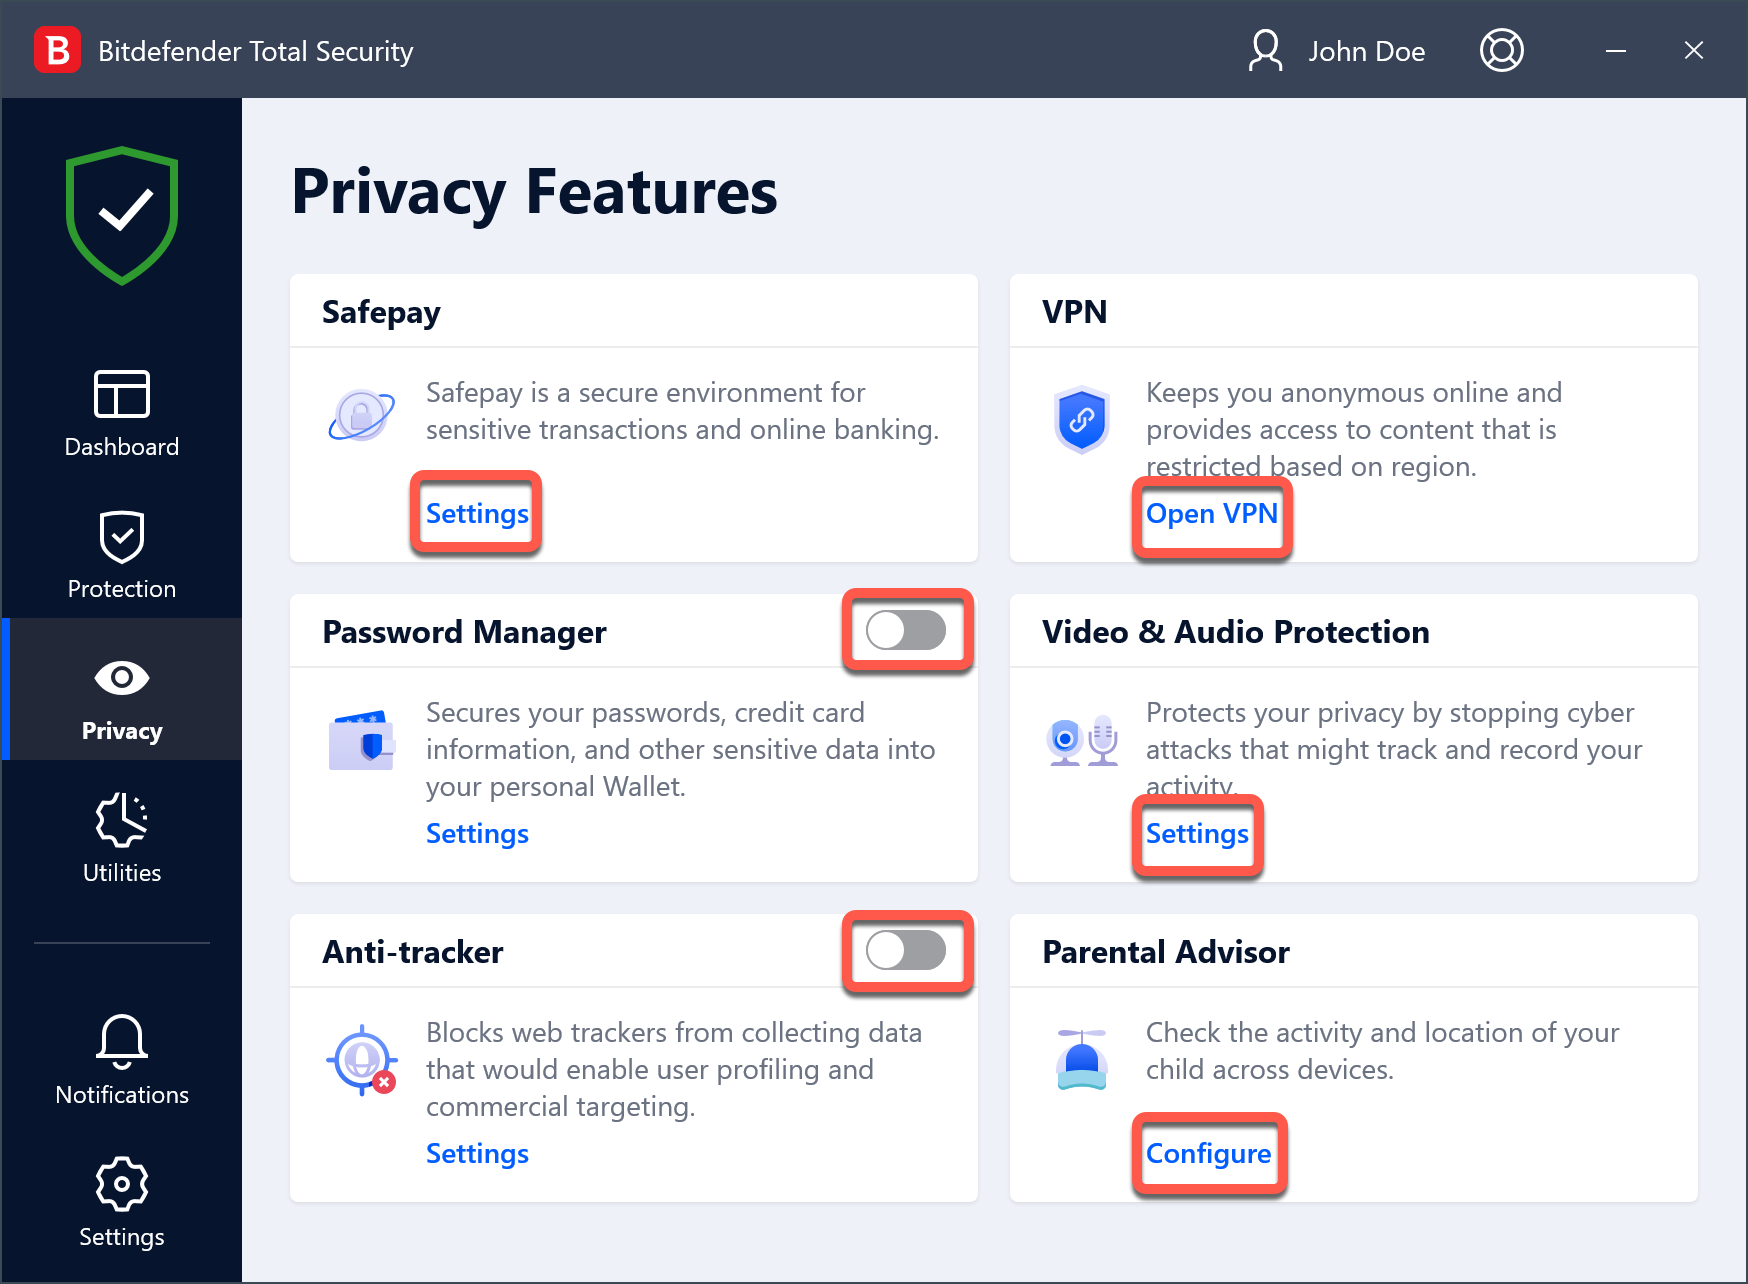 How to disable all modules in Bitdefender - Privacy features